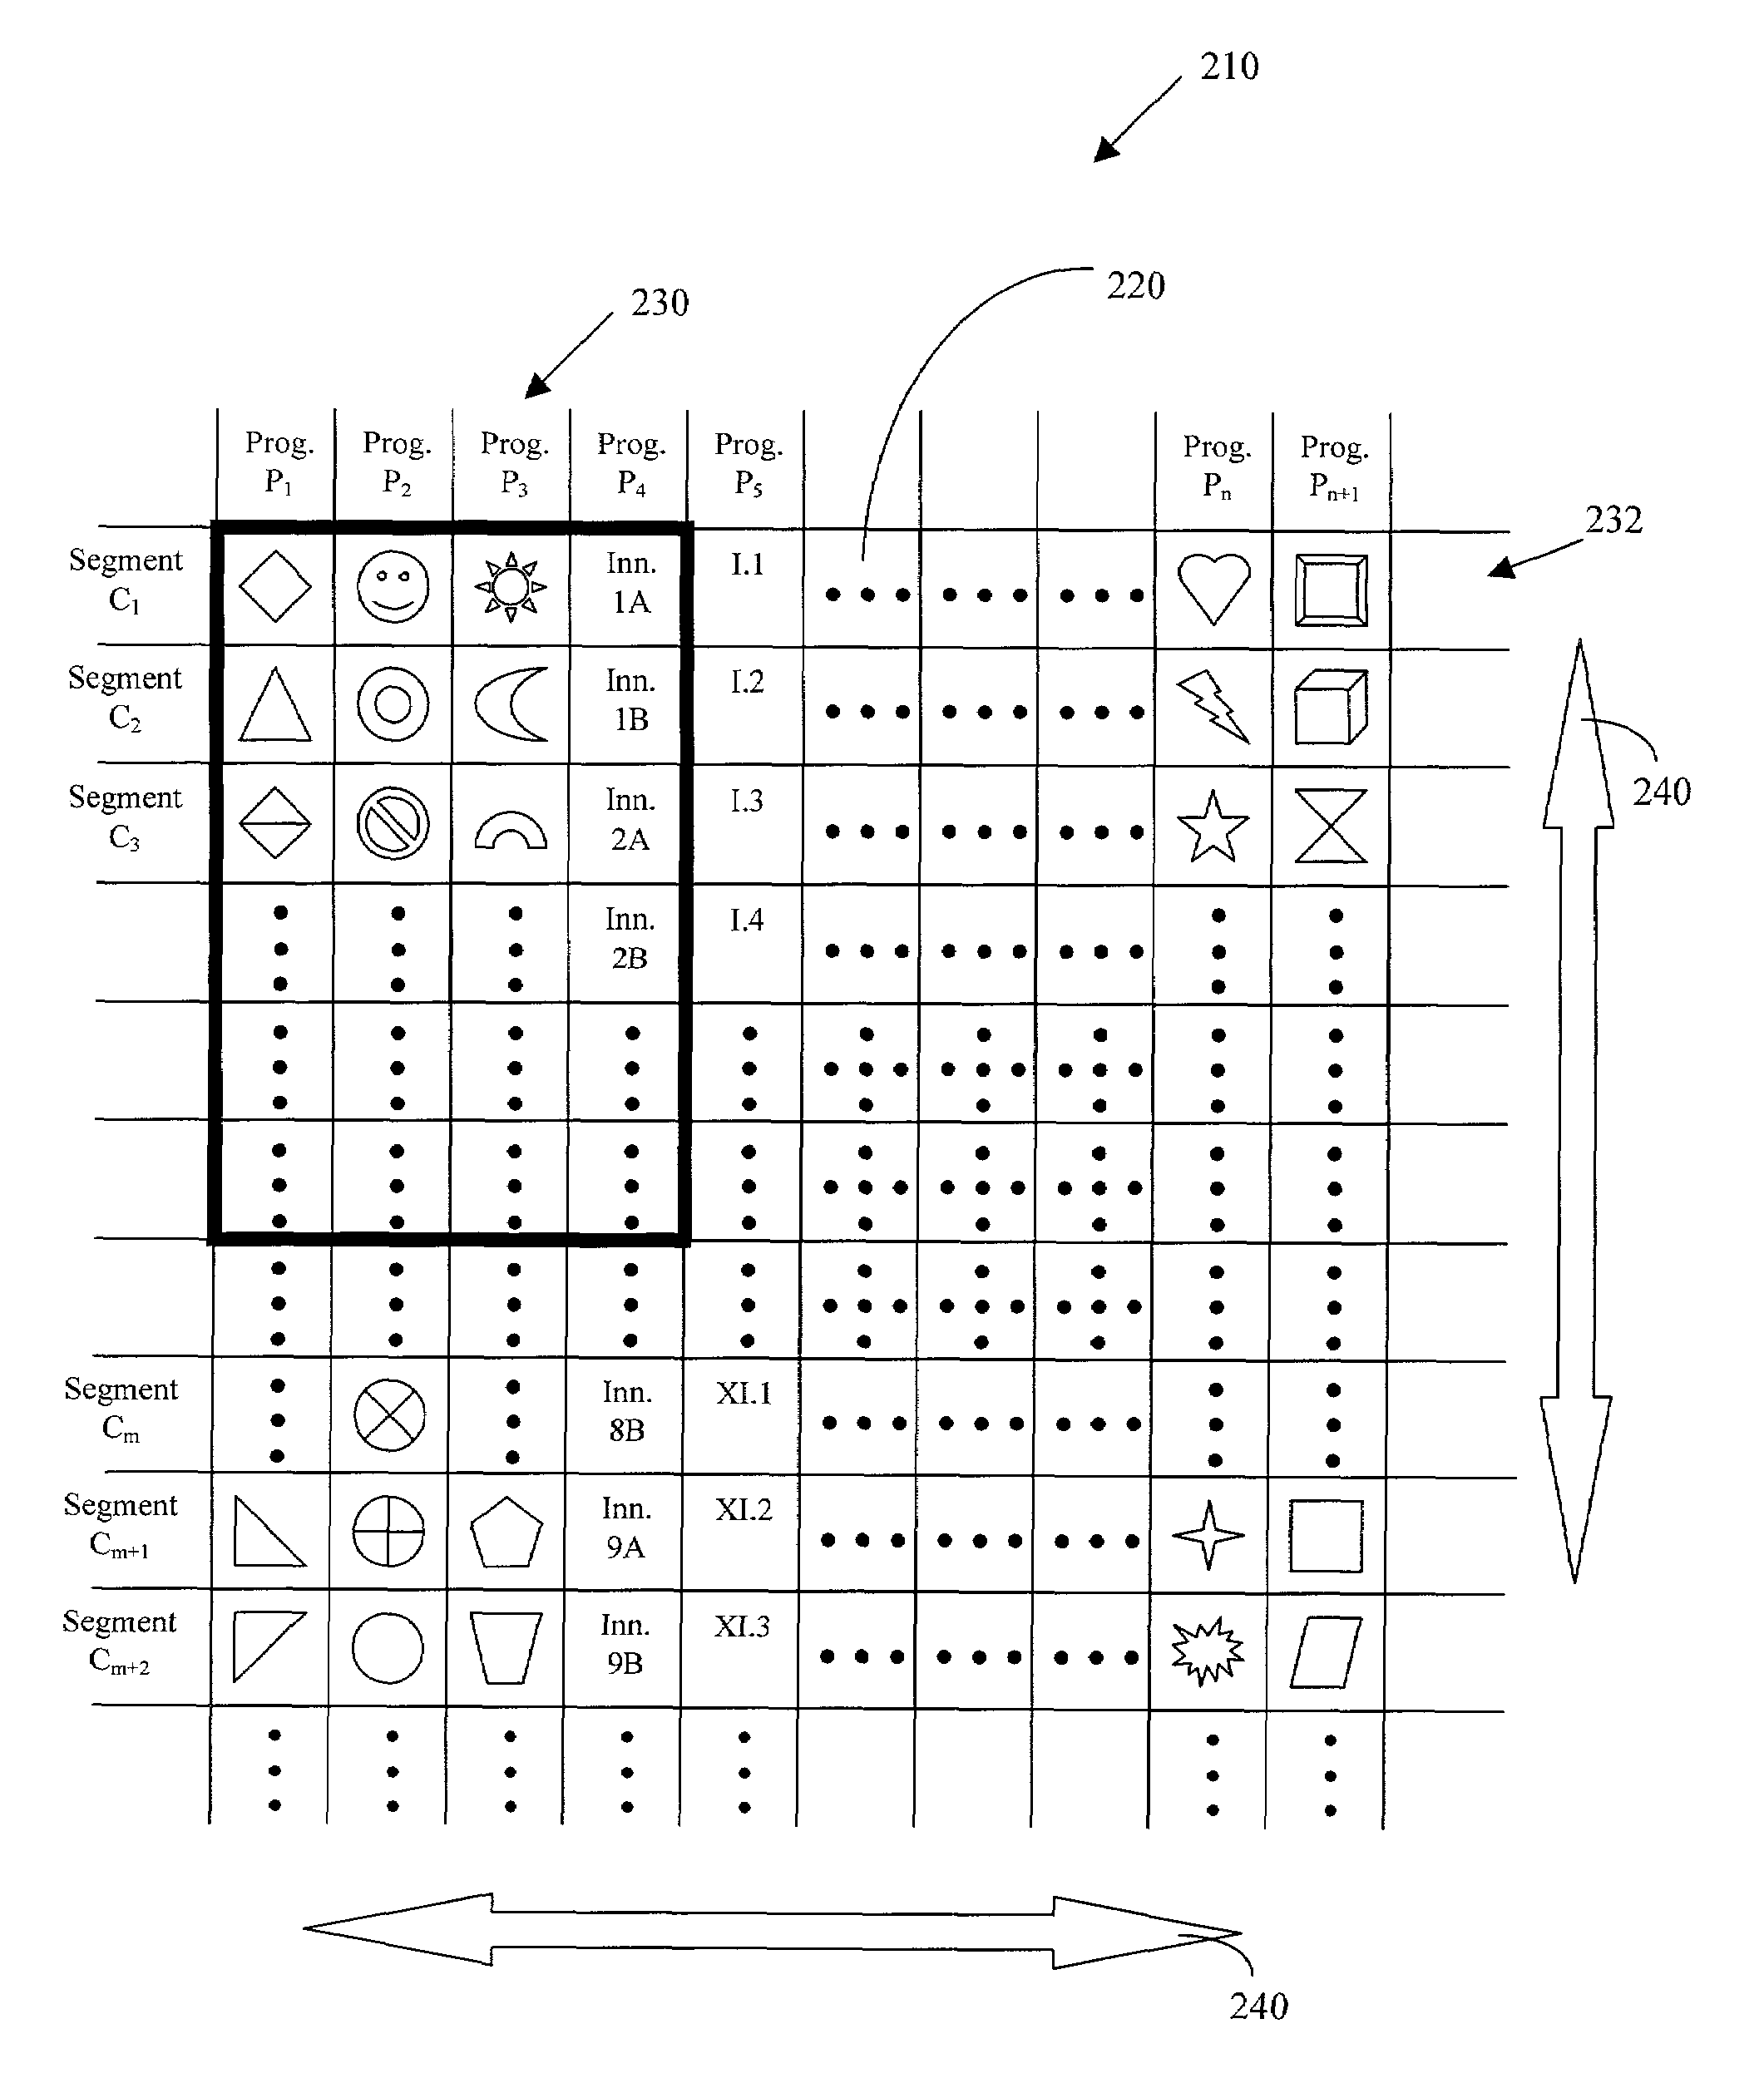 Audiovisual system which uses metadata to allow user-initiated jumps from point to point within multiple audiovisual streams